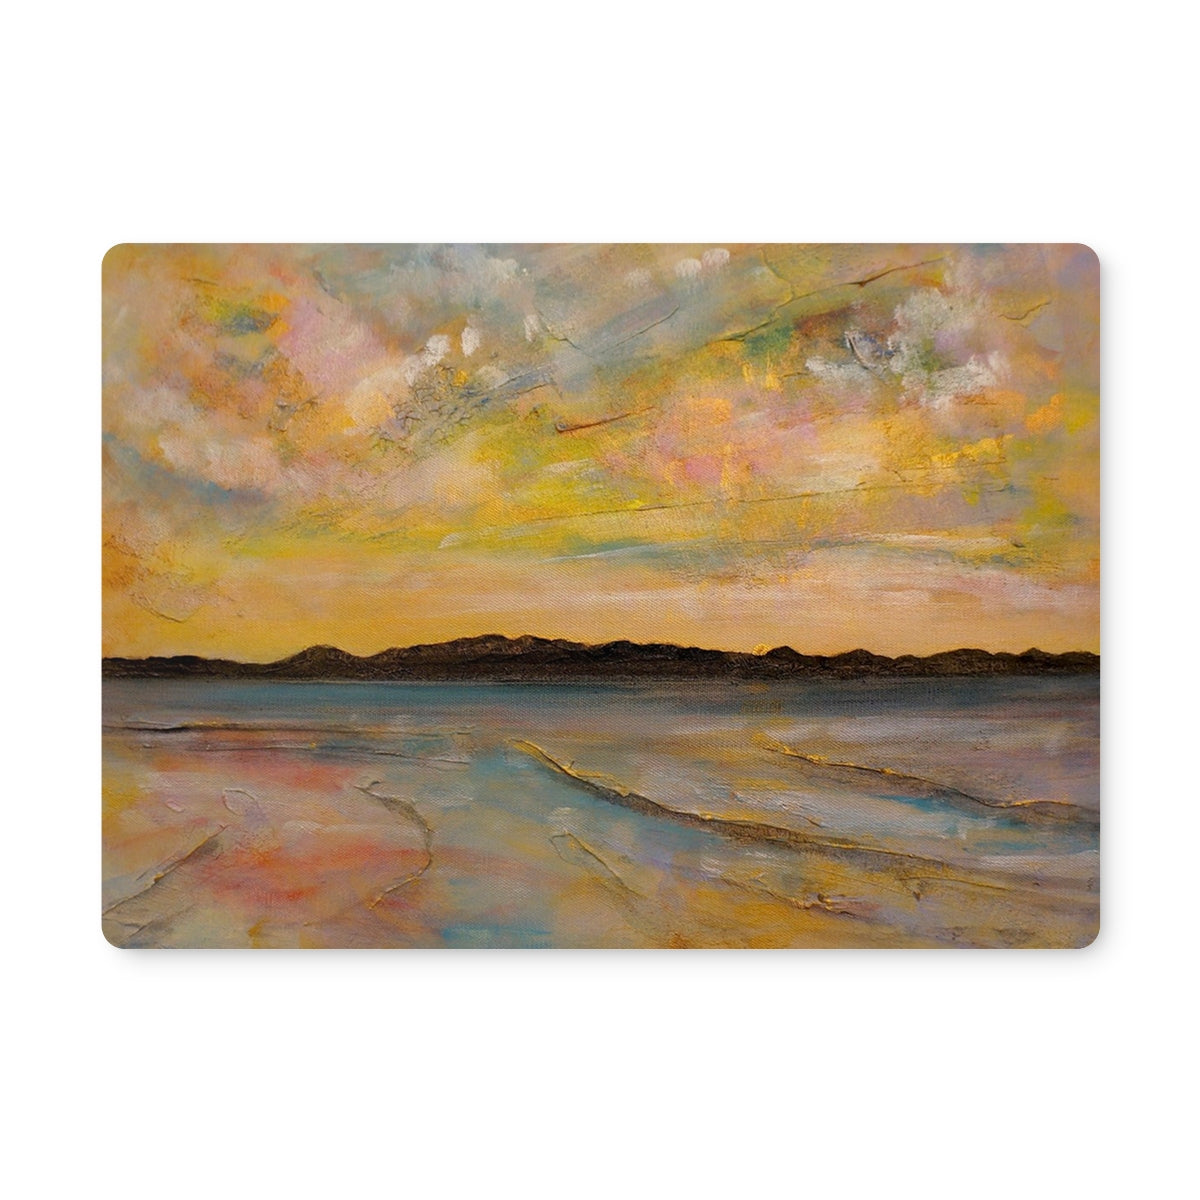 Vallay Island North Uist Art Gifts Placemat-Placemats-Hebridean Islands Art Gallery-6 Placemats-Paintings, Prints, Homeware, Art Gifts From Scotland By Scottish Artist Kevin Hunter